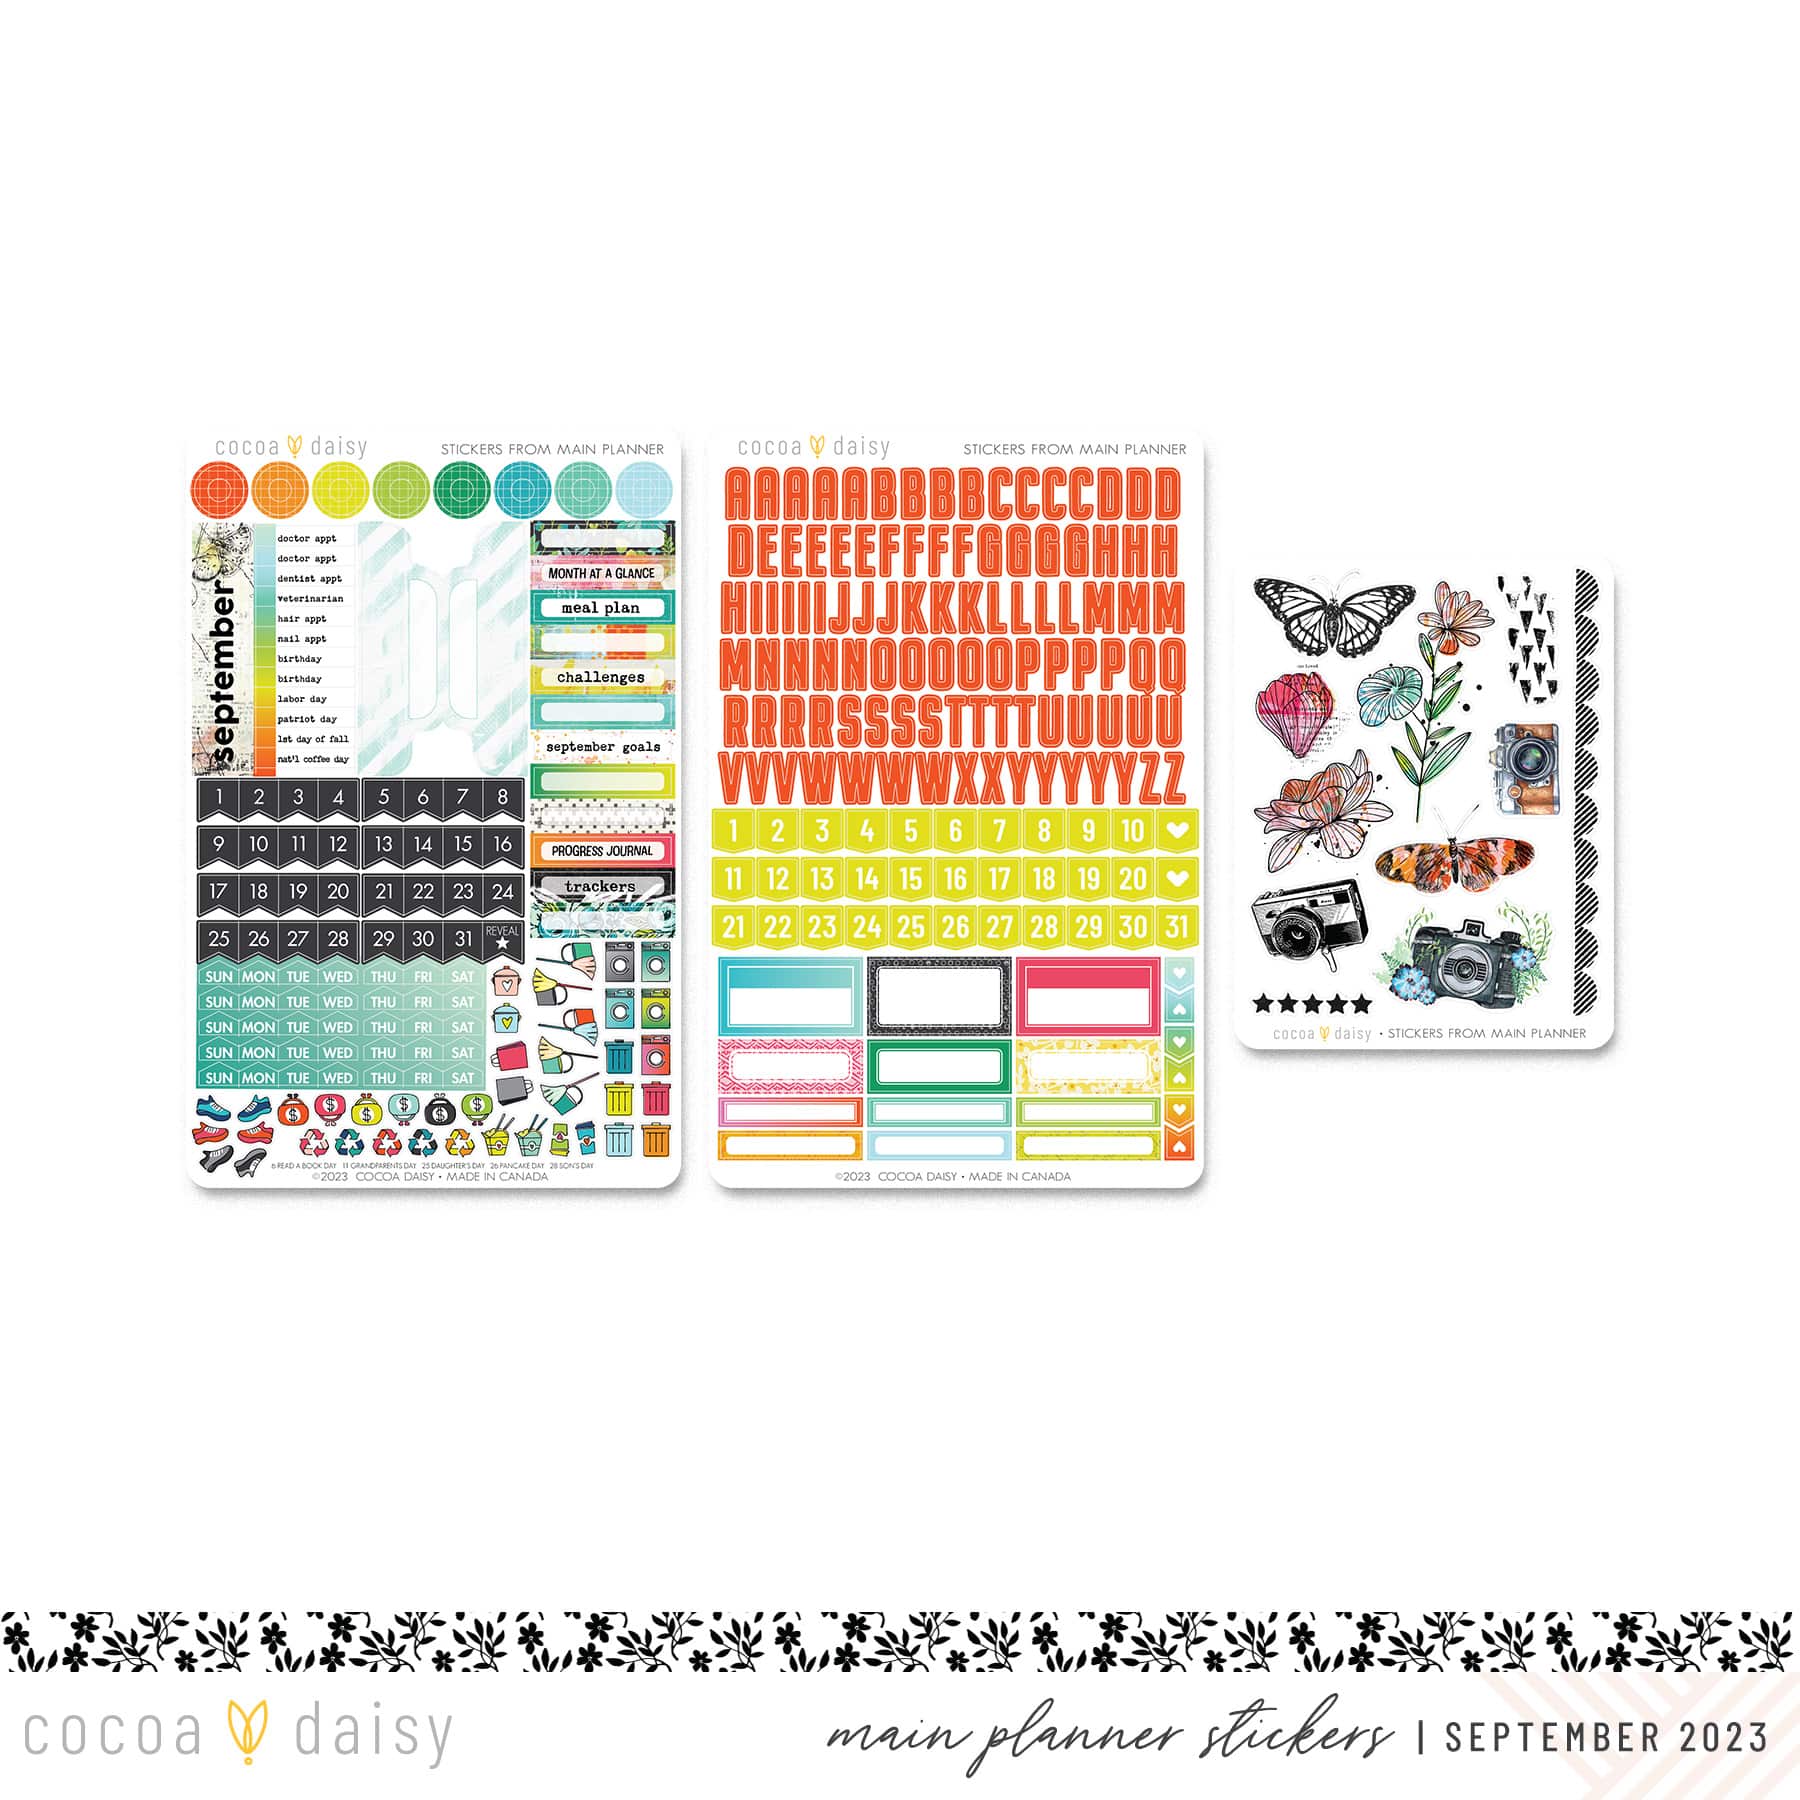 Daily Journal Stickers from Main Planner September 2023